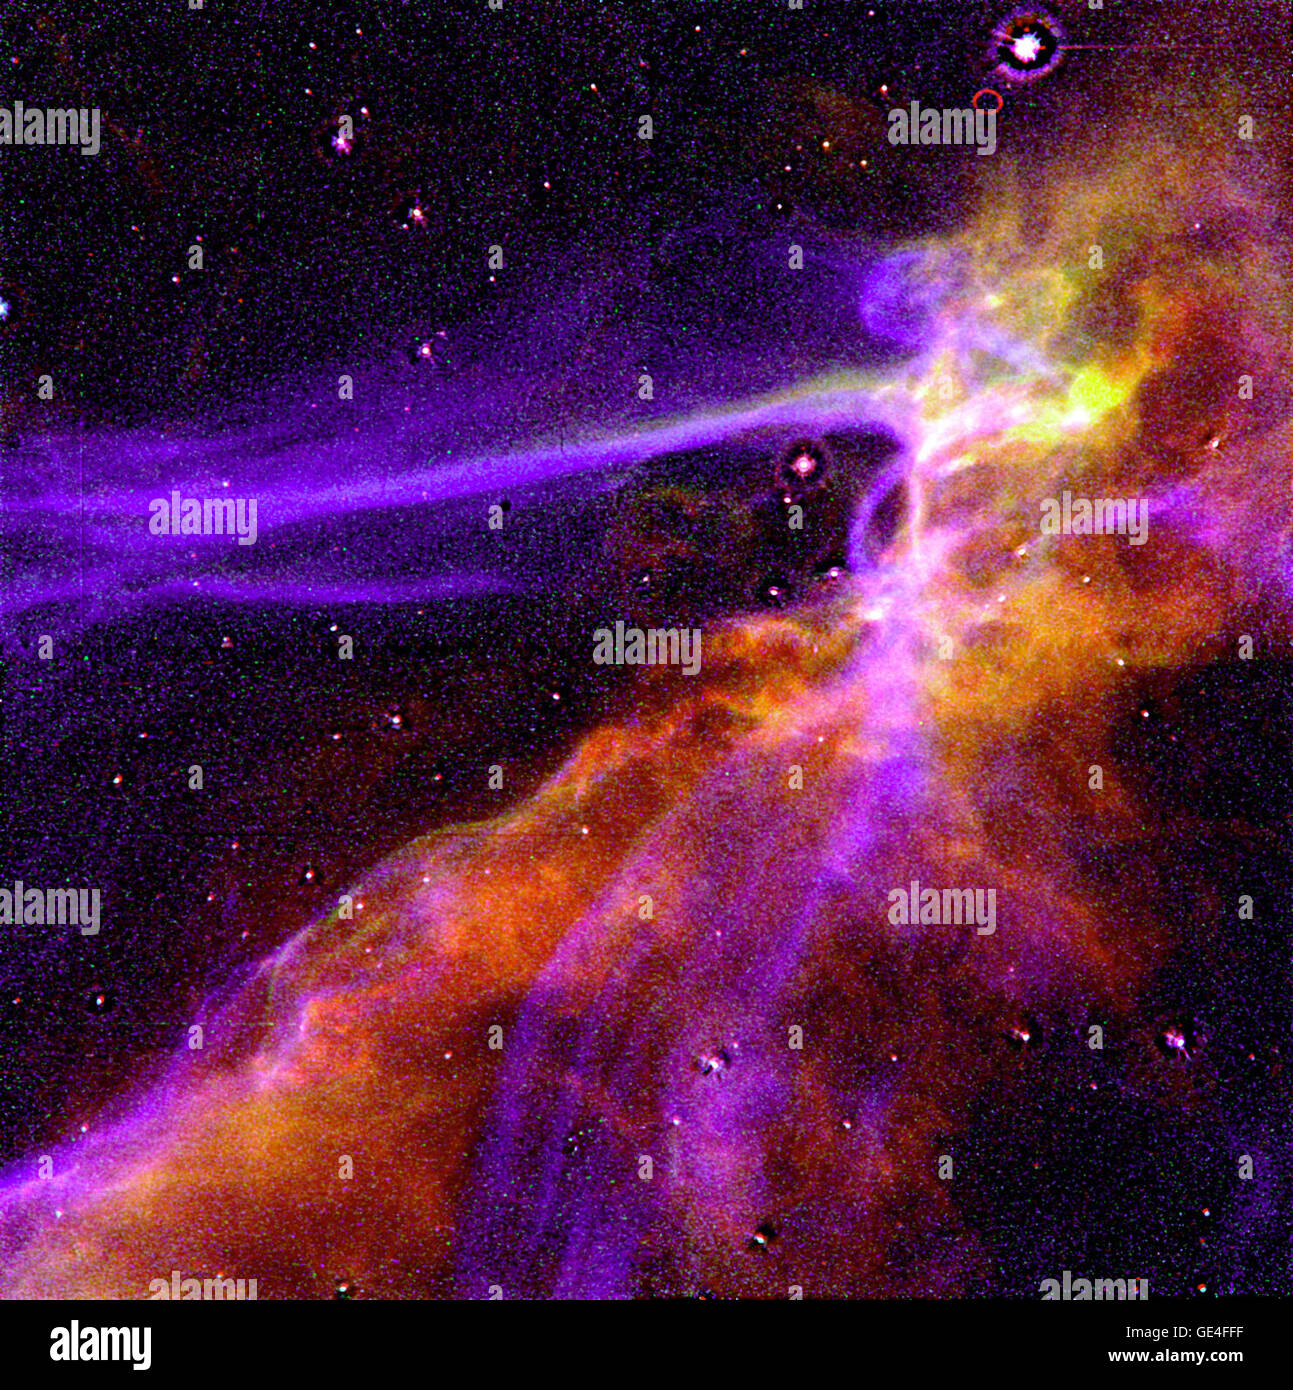 (January 1, 1993) This is an image of a small portion of the Cygnus Loop supernova remnant, which marks the edge of a bubble-like, expanding blast wave from a colossal stellar explosion, occurring about 15,000 years ago. The HST image shows the structure behind the shock waves, allowing astronomers for the first time to directly compare the actual structure of the shock with theoretical model calculations. Besides supernova remnants, these shock models are important in understanding a wide range of astrophysical phenomena, from winds in newly-formed stars to cataclysmic stellar outbursts. The  Stock Photo